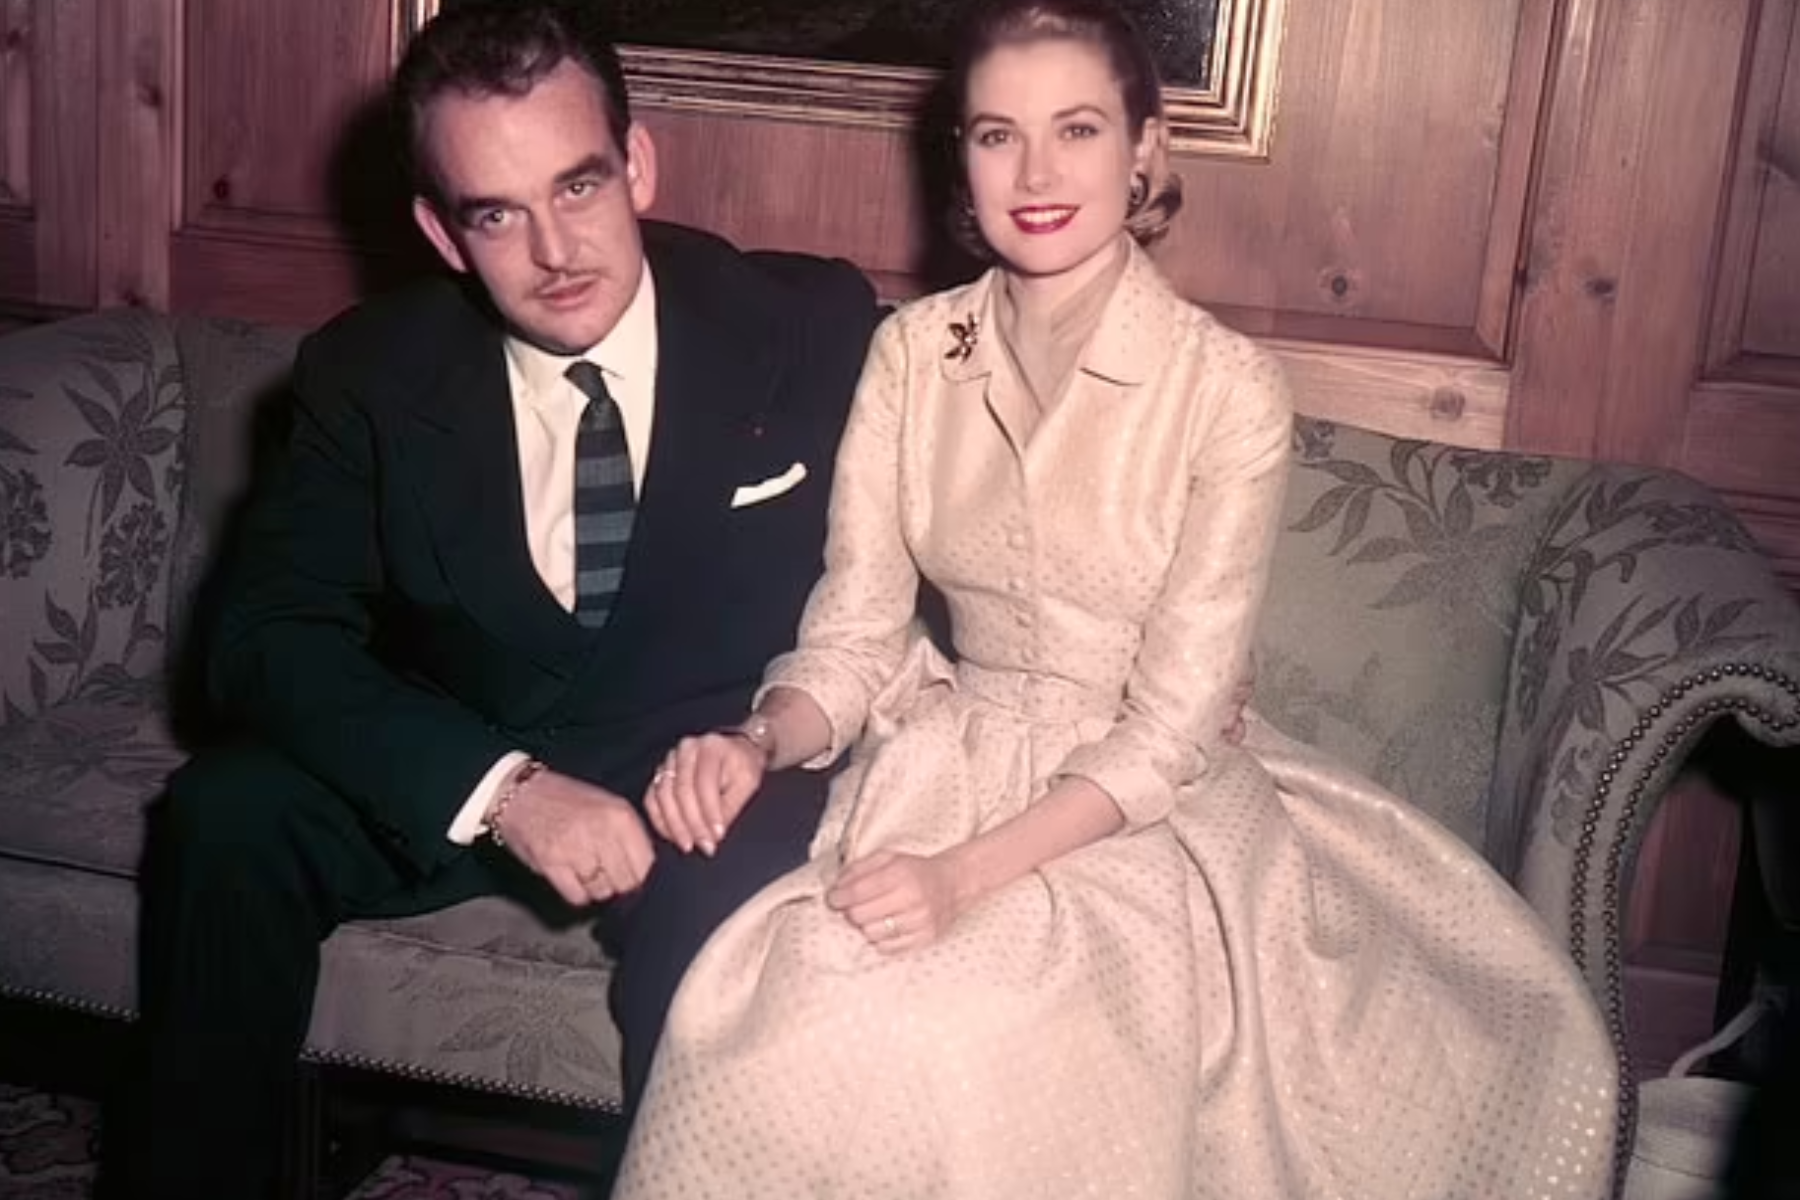 Grace and Prince Rainier at her parents' Philadelphia house after their January 1956 engagement announcement